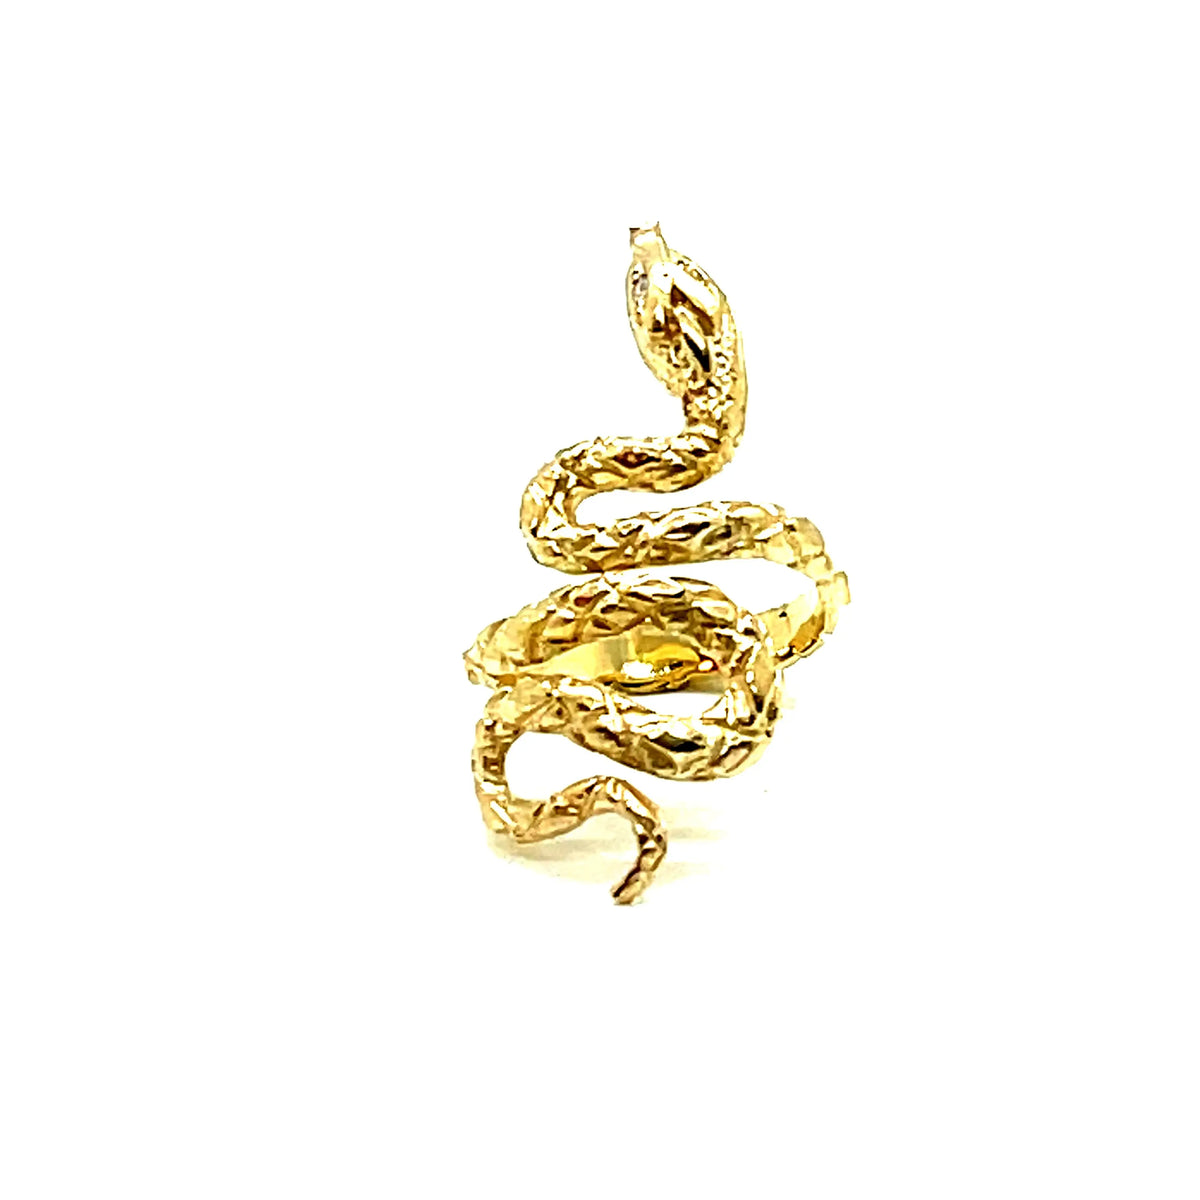 14k yellow gold snake ring by Victoria Cunningham